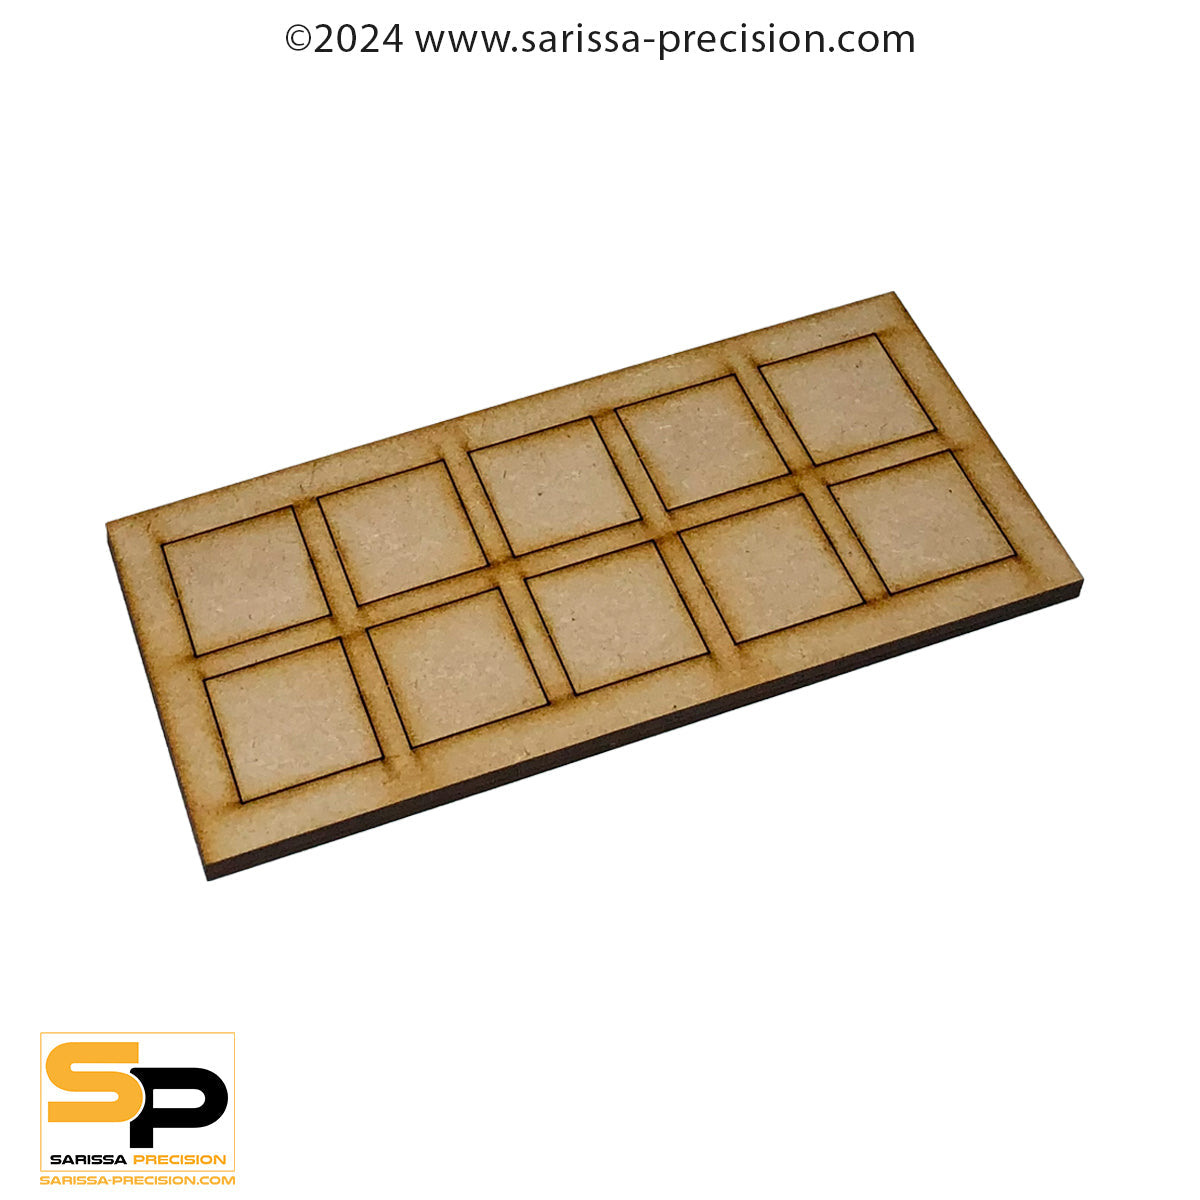 6x3 30x30mm Conversion Tray for 25x25mm bases